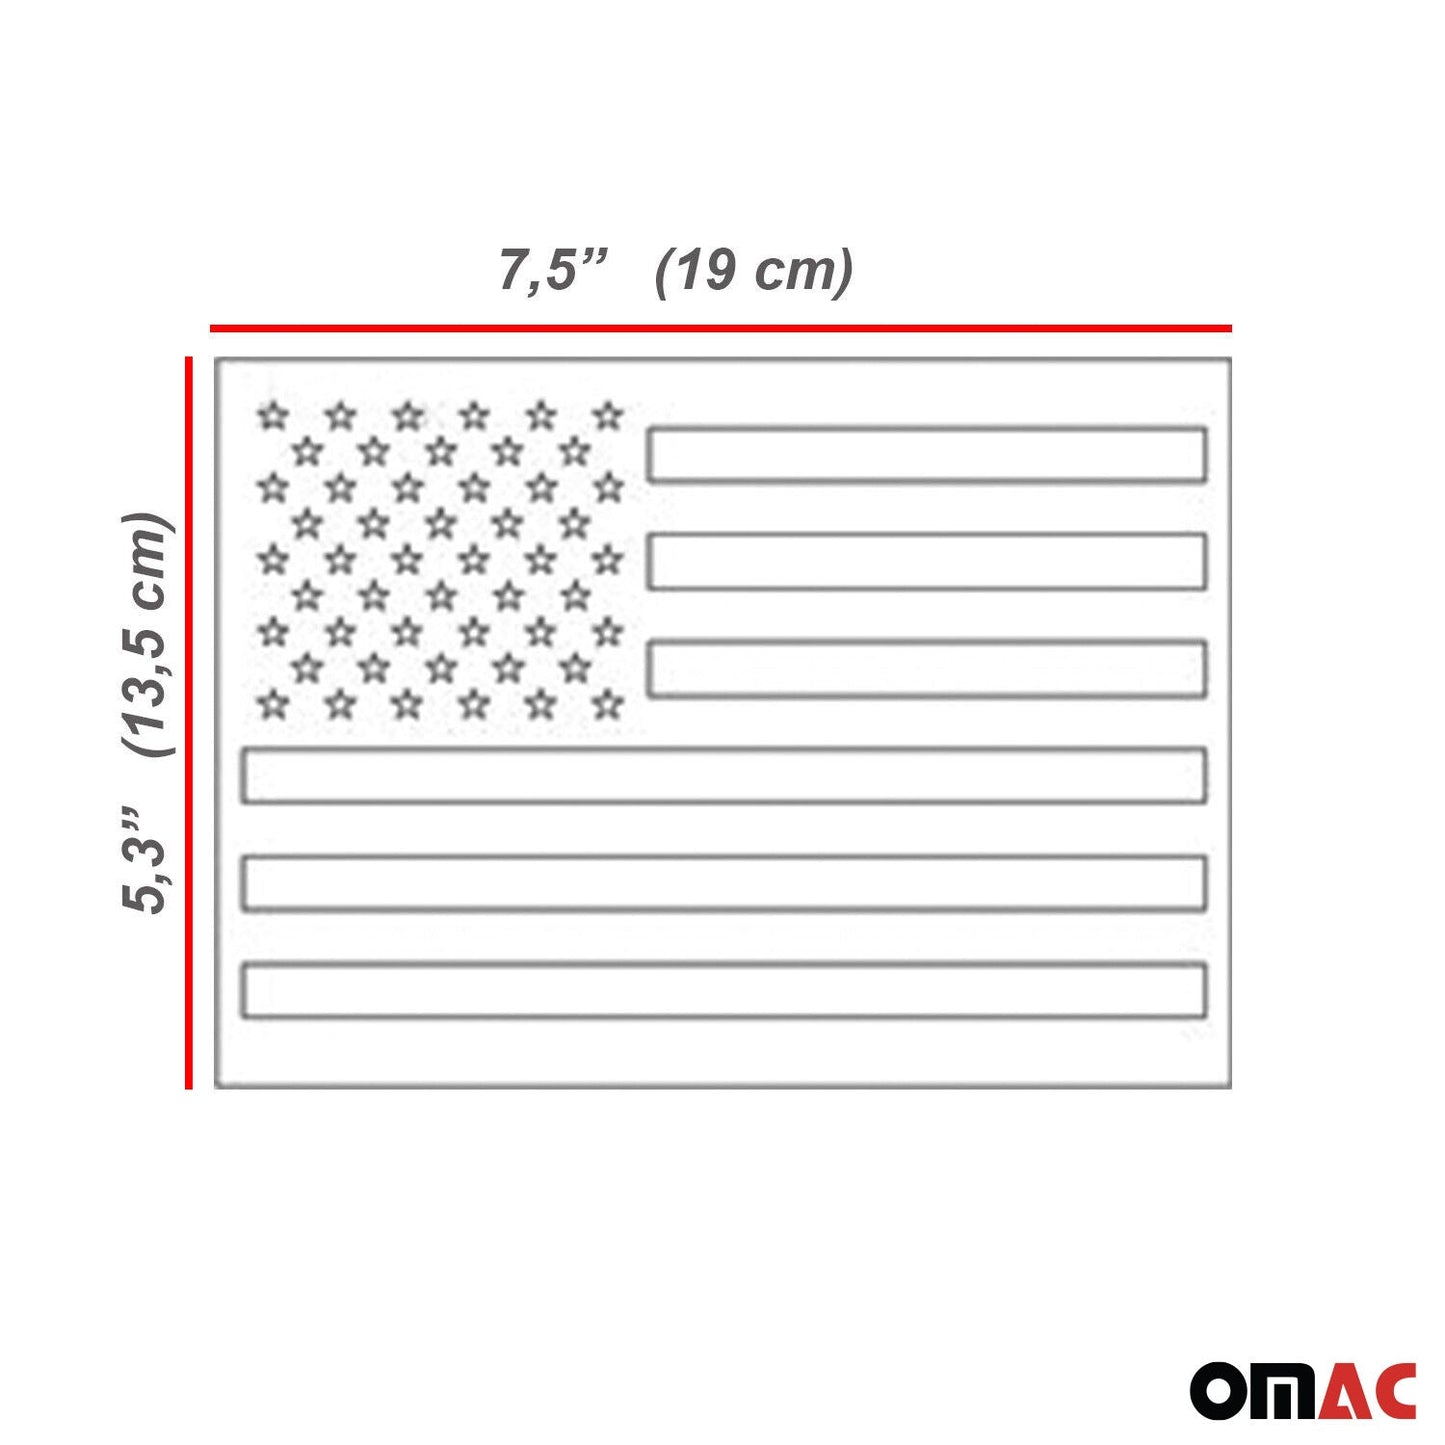 OMAC 2 Pcs US American Flag for RAM 2500 Chrome Decal Sticker Stainless Steel U022163